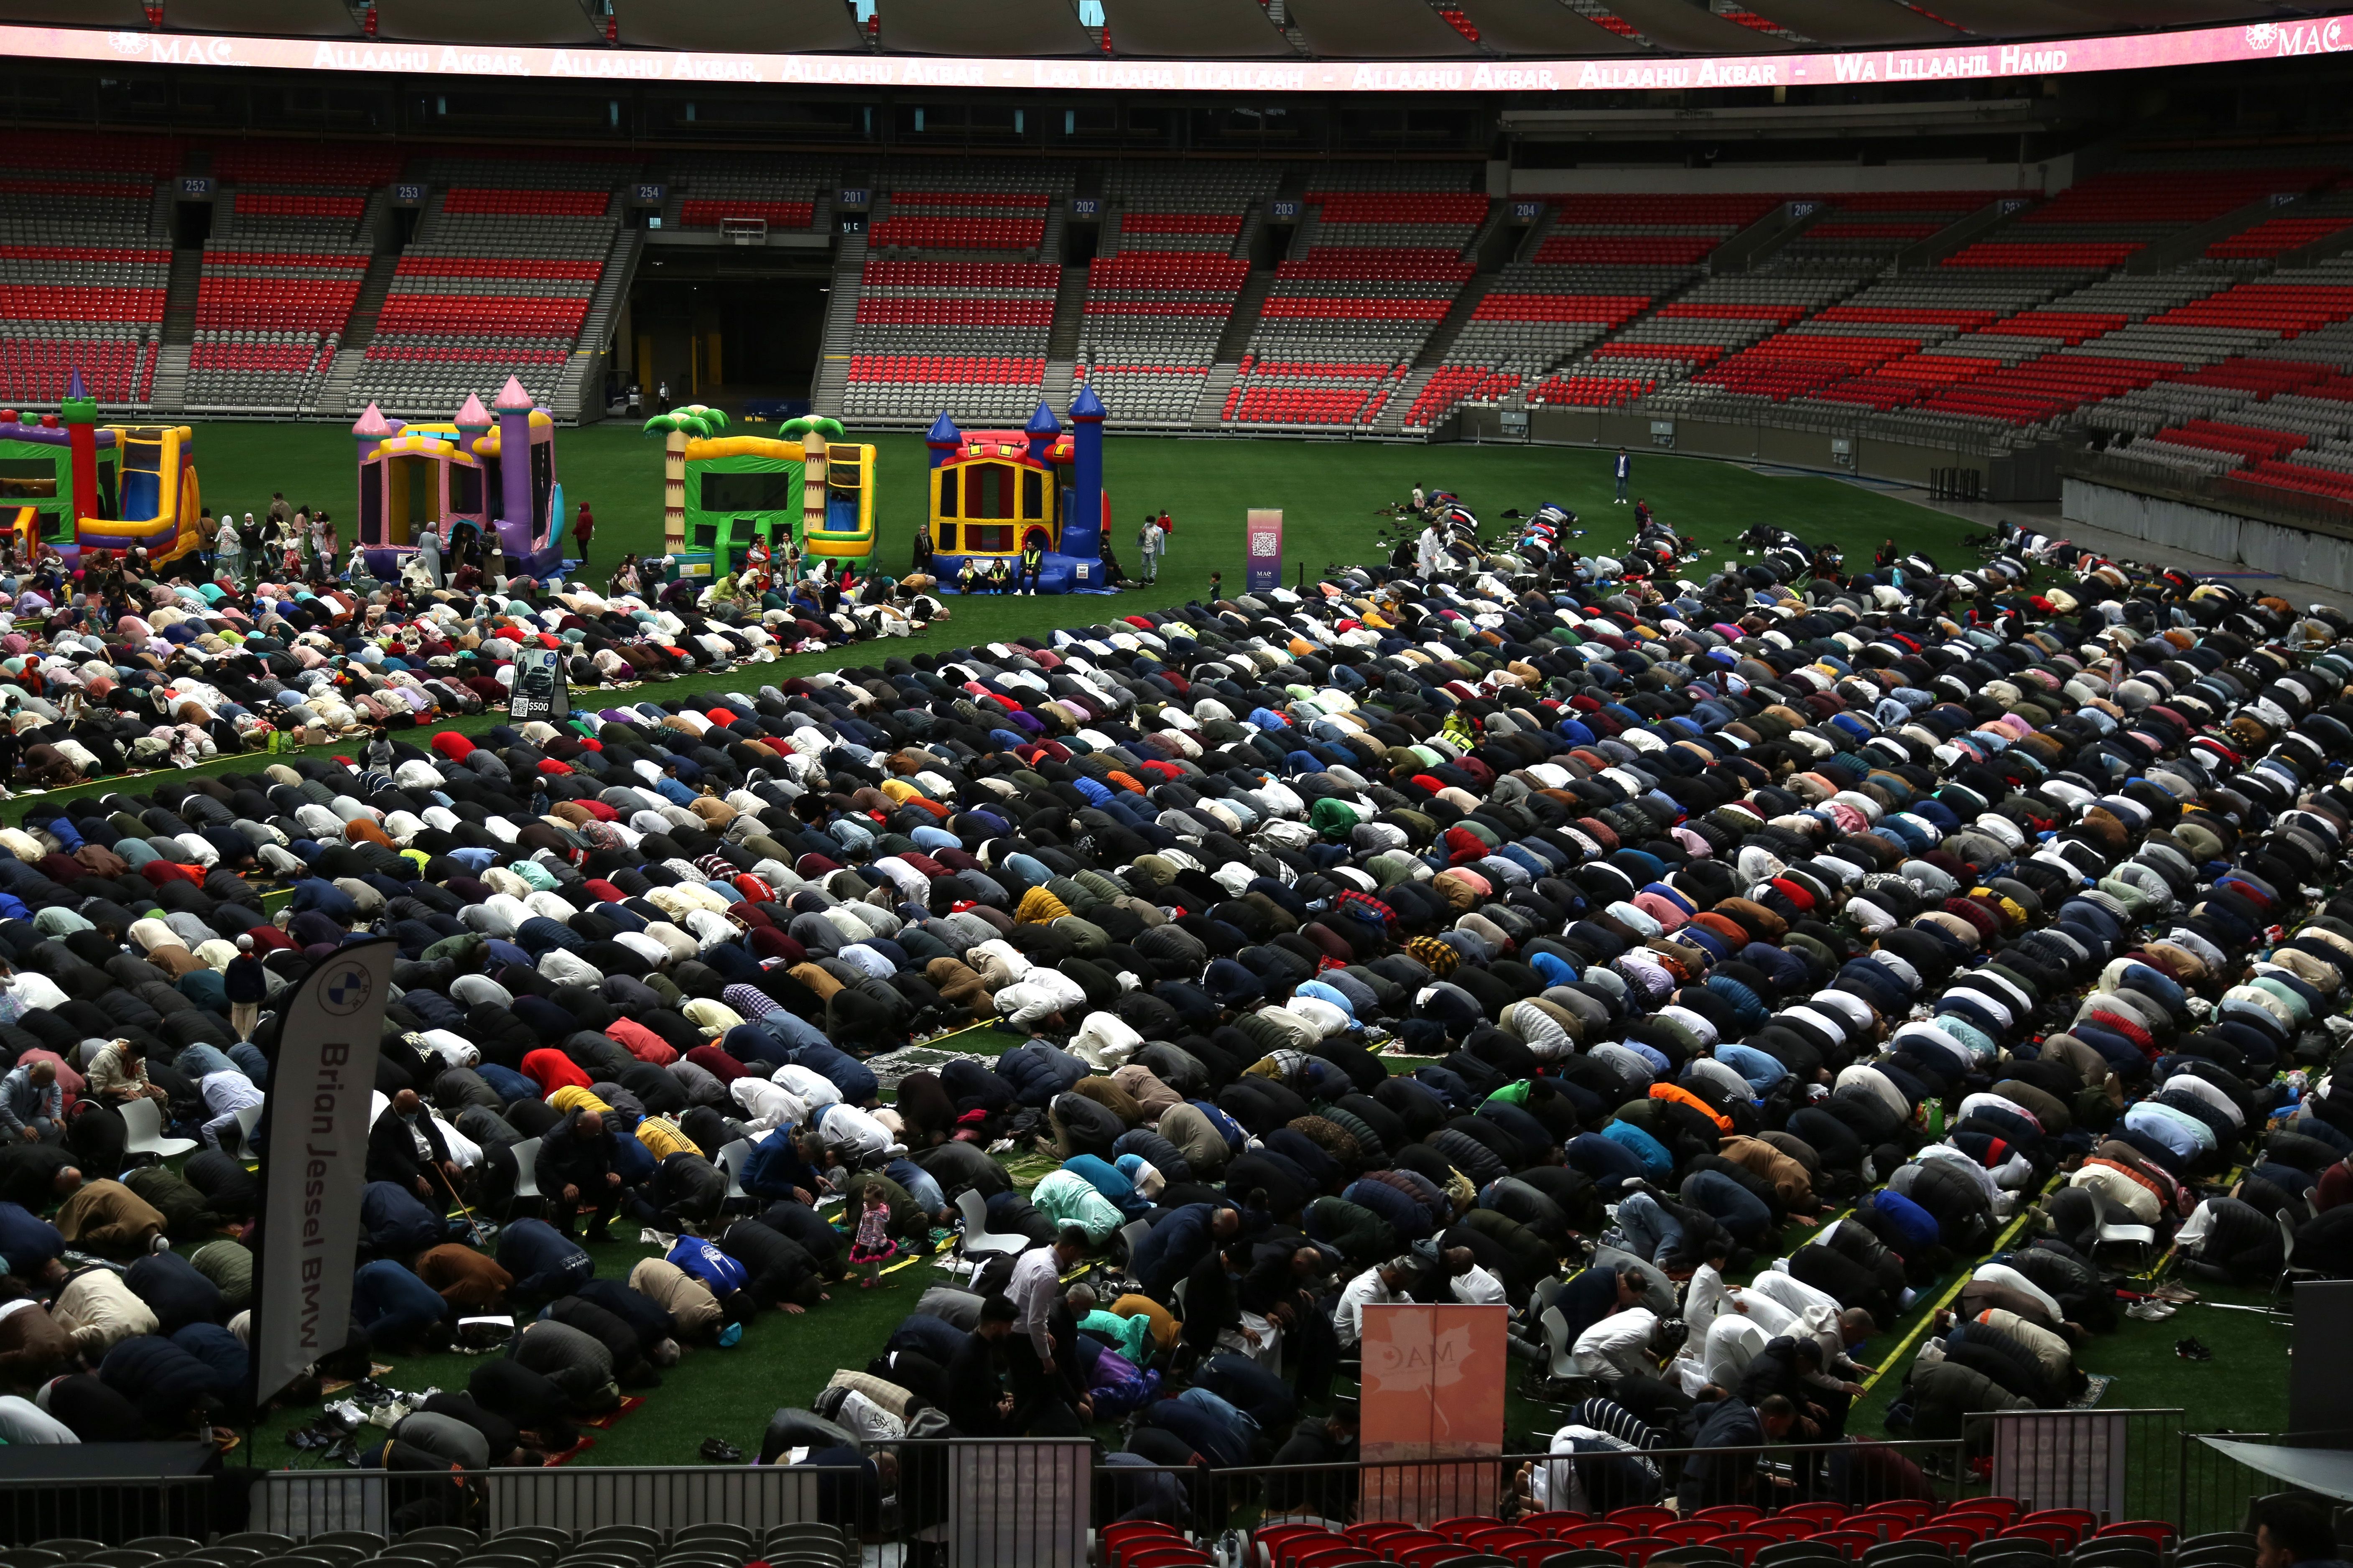  Muslims perform the prayer of Eid al-Fitr at BC Place Stadium in Vancouver, British Columbia, Canada on May 2, 2022. (Photo by Mert Alper Dervis/Anadolu Agency via Getty Images)